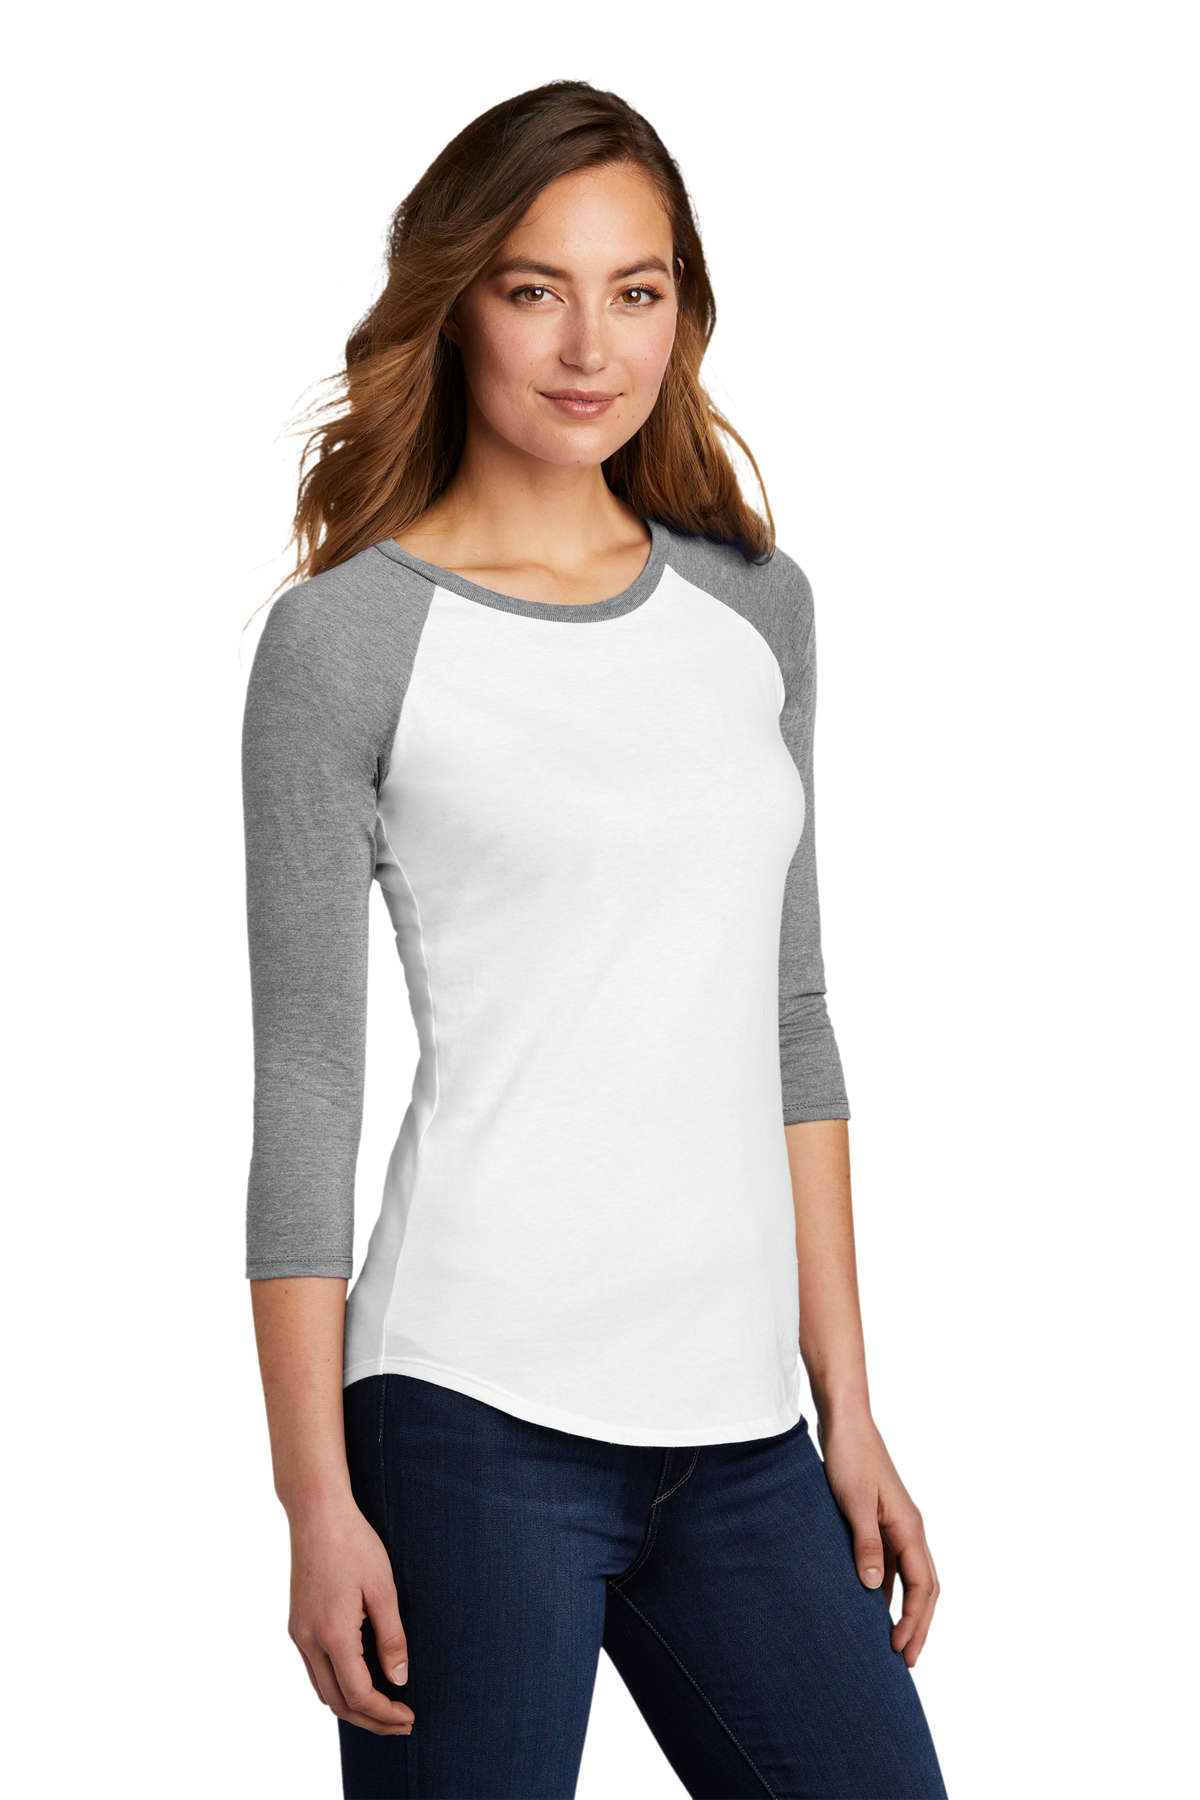 District Women’s Fitted Very Important Tee 3/4-Sleeve Raglan | Product ...